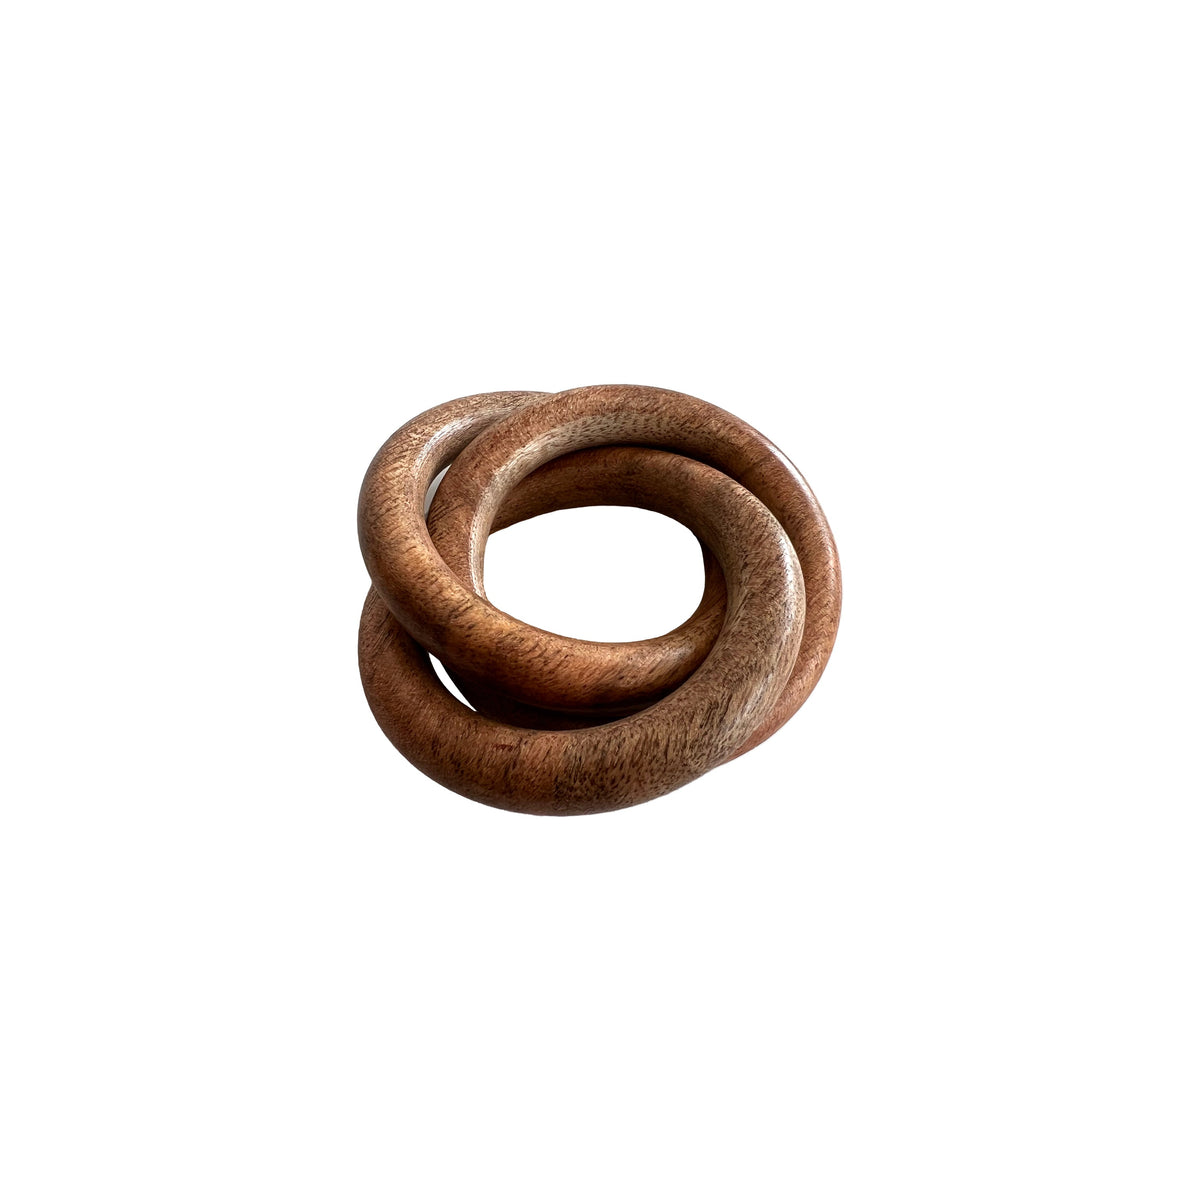 Wooden triple Bangle Napkin Ring, sold as a set of 4, from Caskata